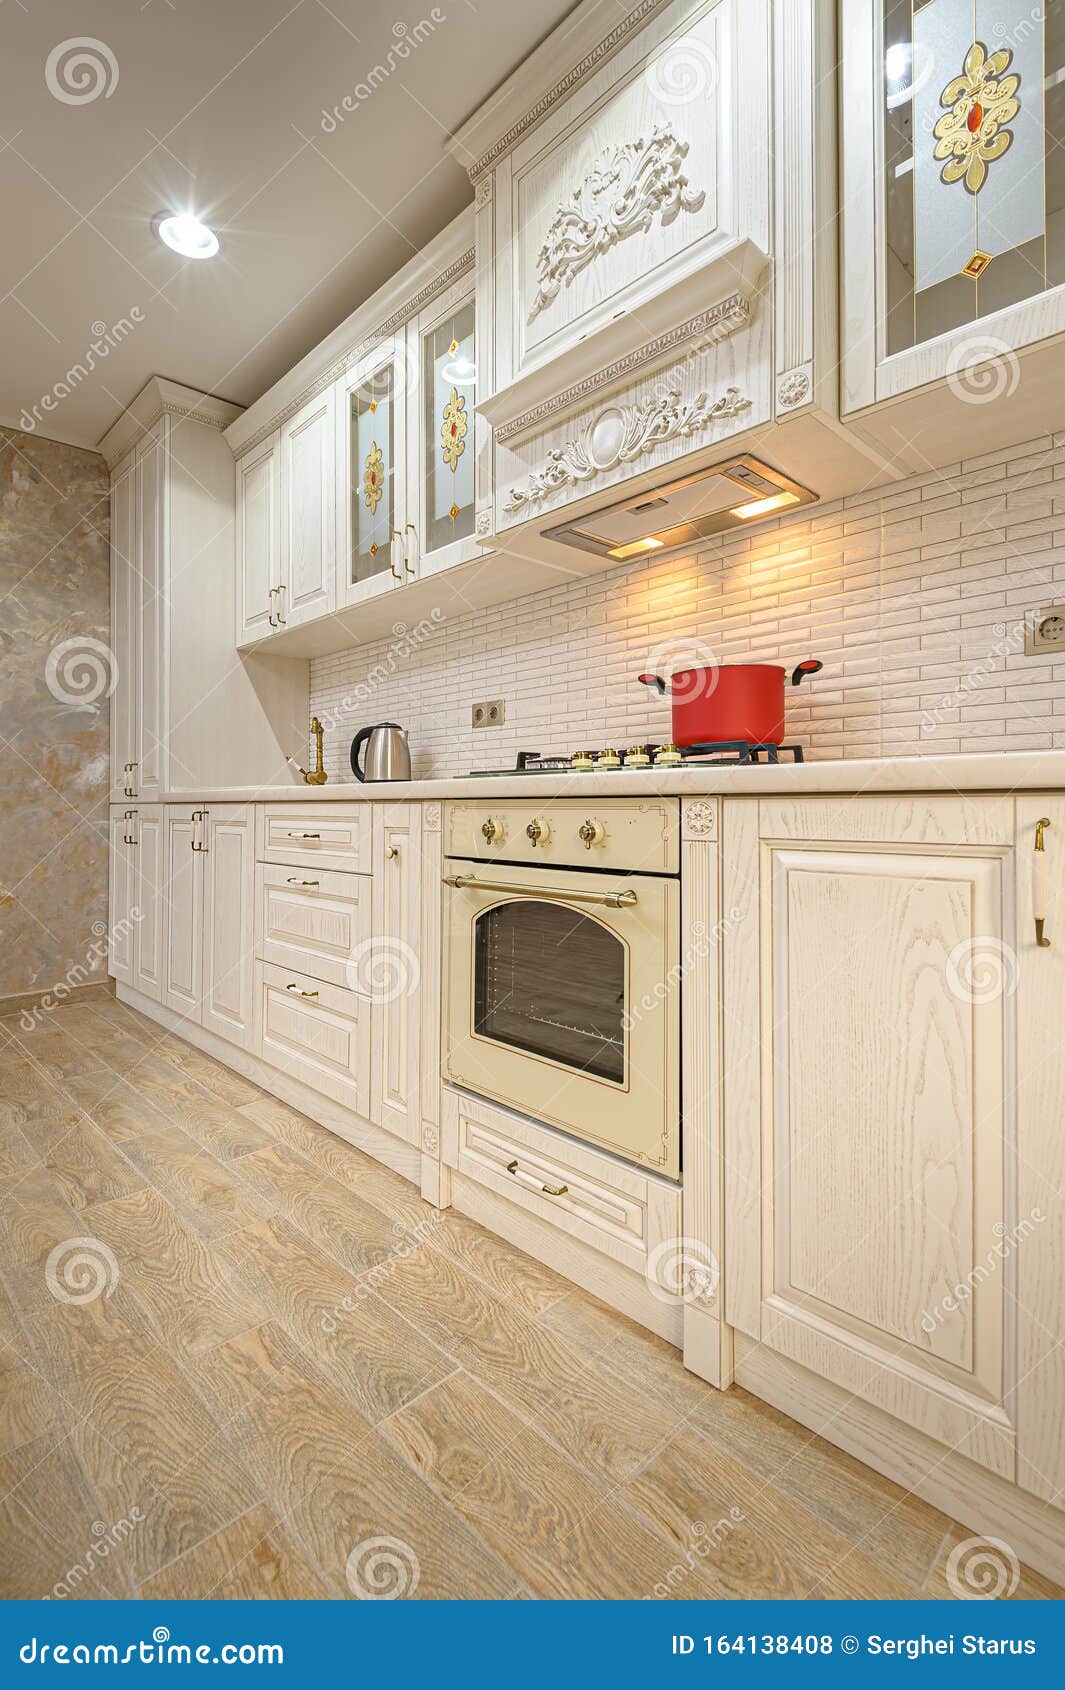 Luxury Modern White And Beige Kitchen Interior Stock Photo Image of expensive, furniture